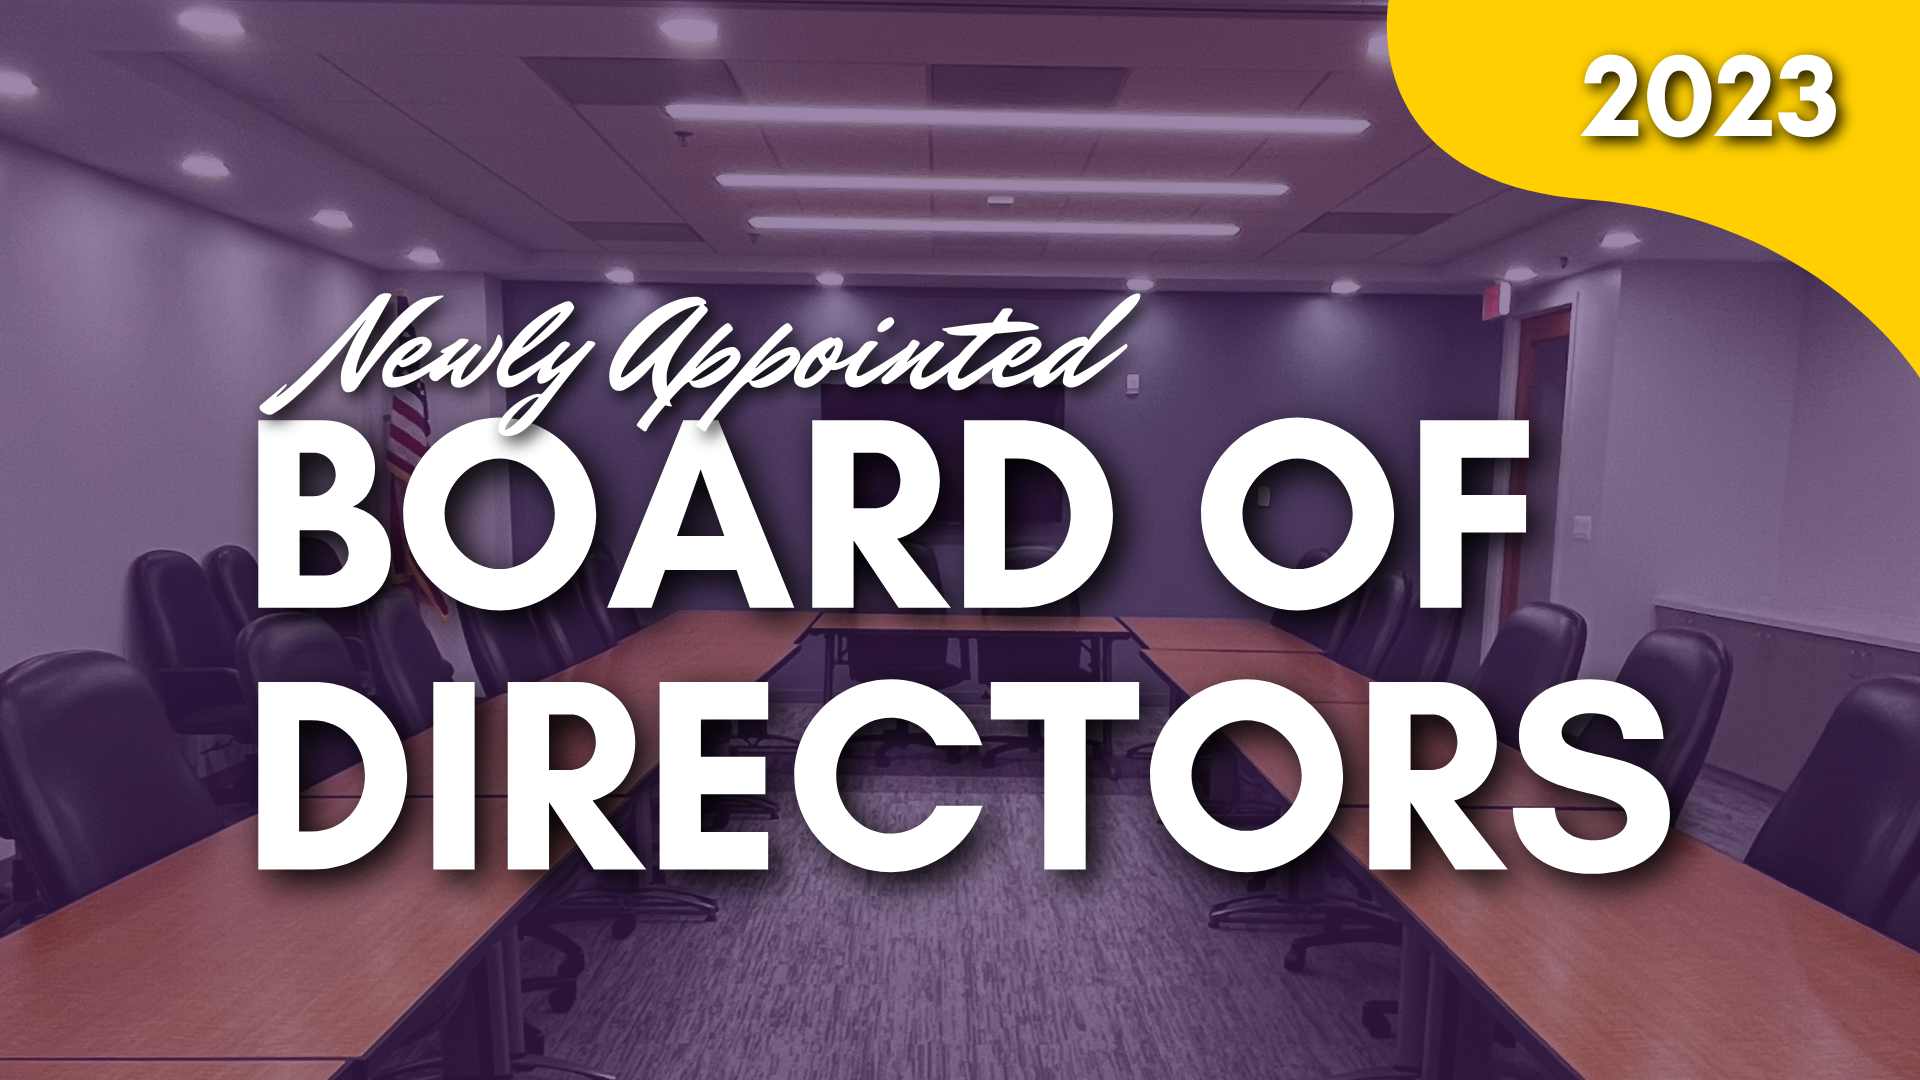 GRCC Appoints Two New Board of Directors for 2023